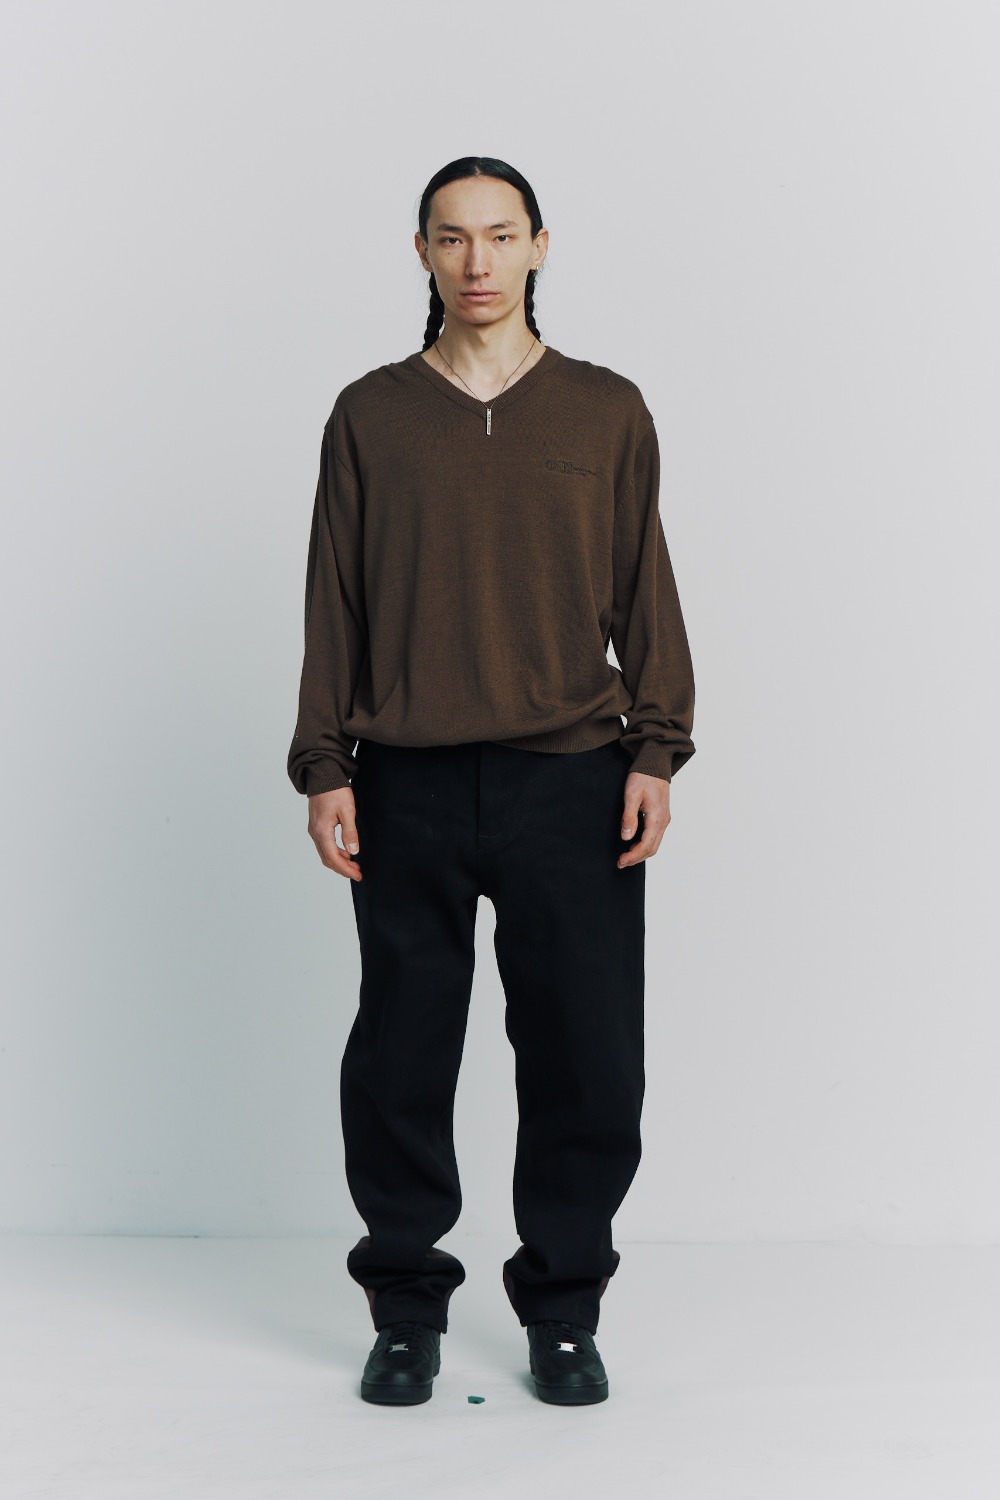 MPa LOOSE FIT SWEATER (BROWN)